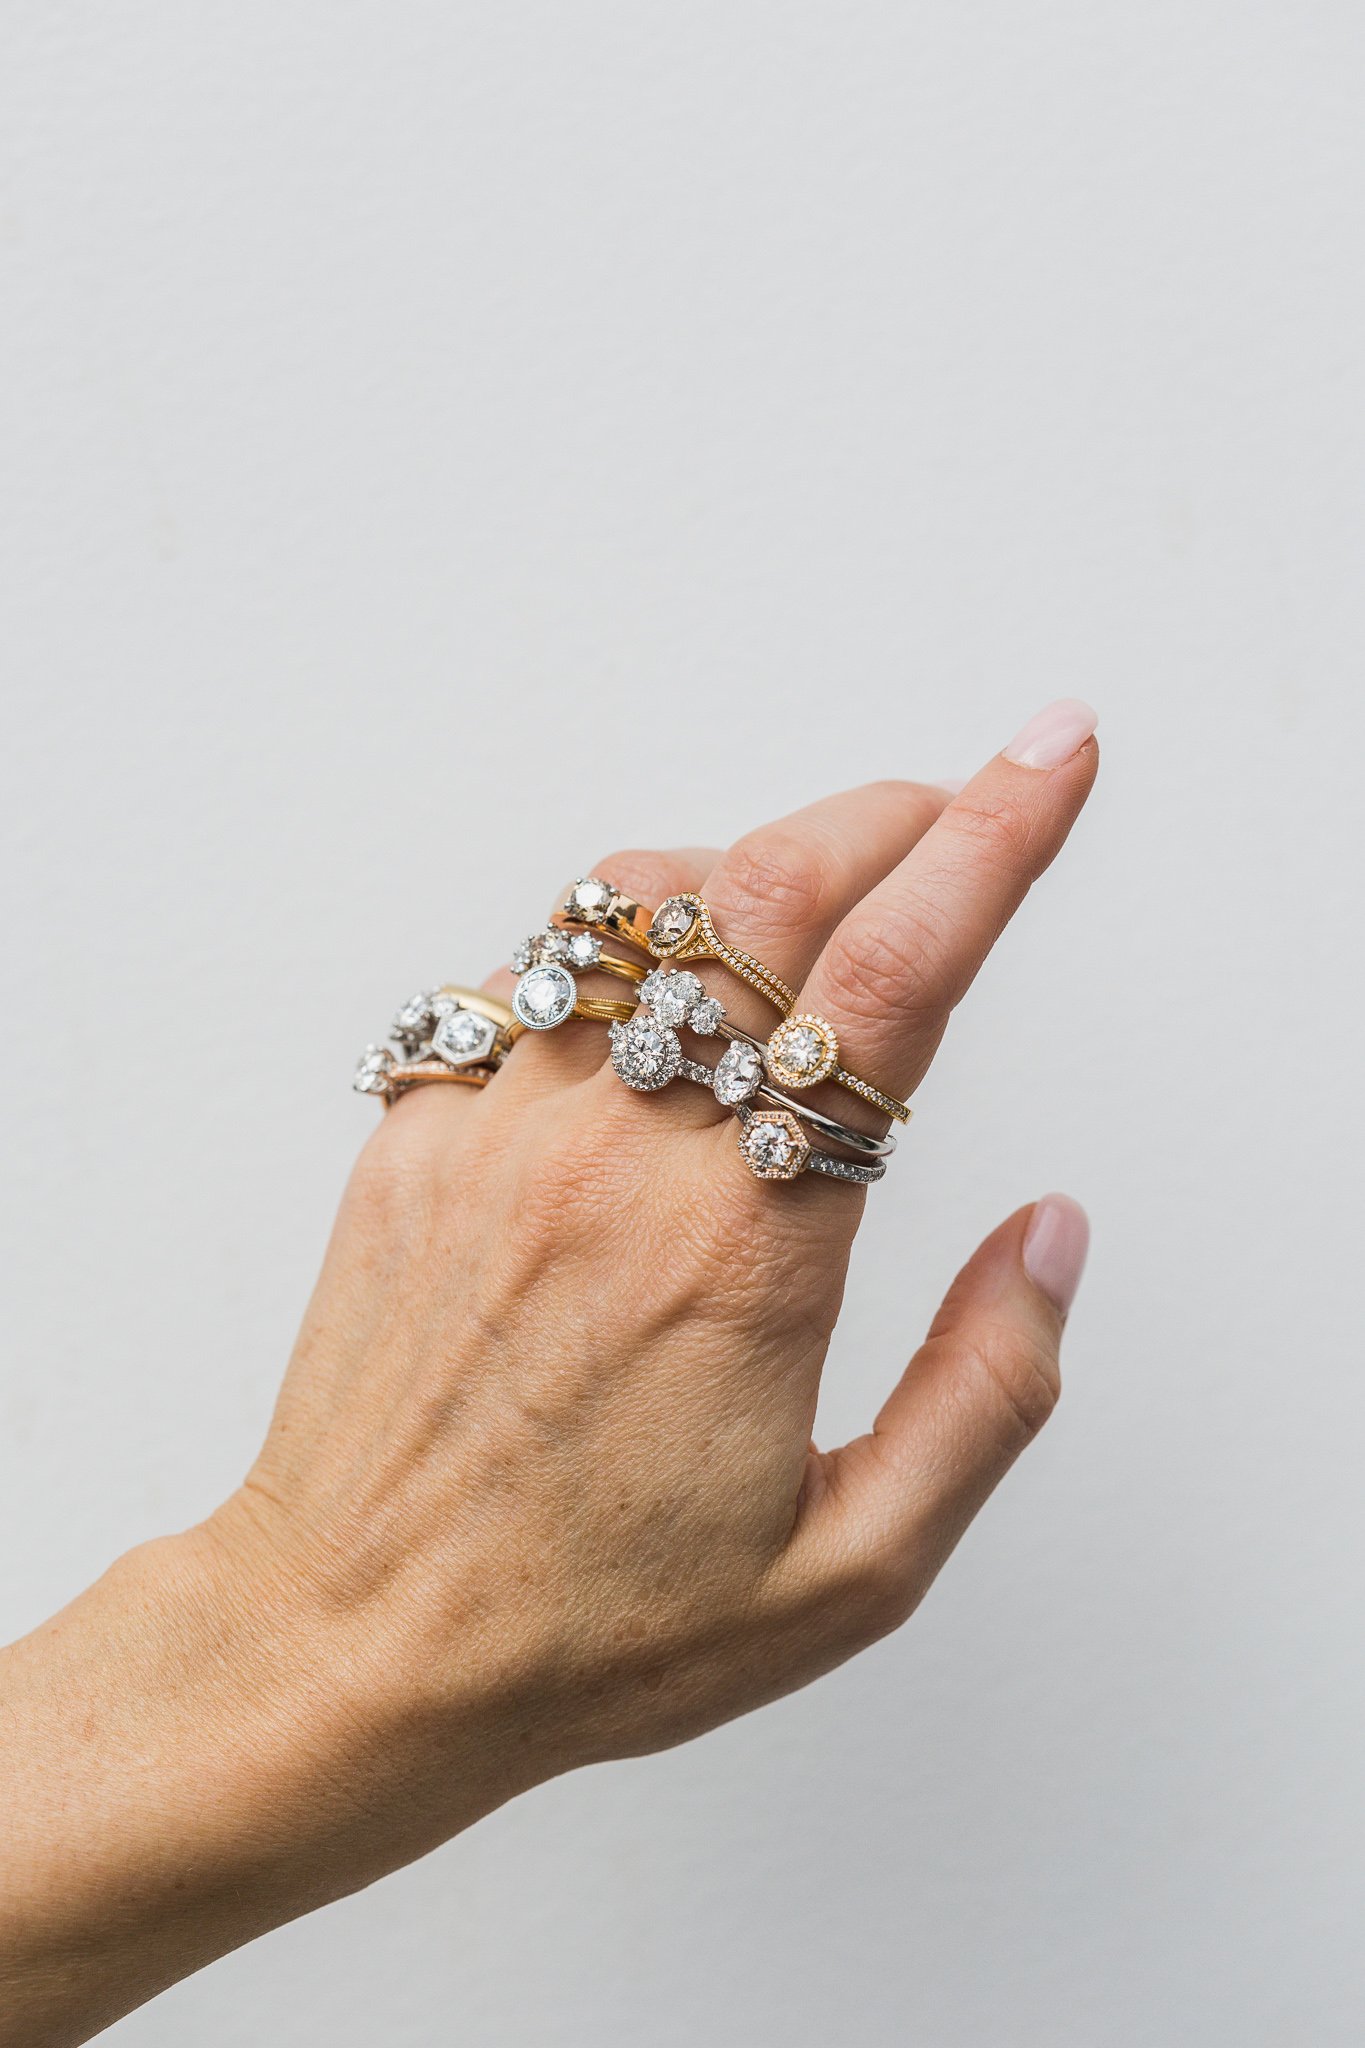 Canberra product photographer - hand wears assorted diamond rings